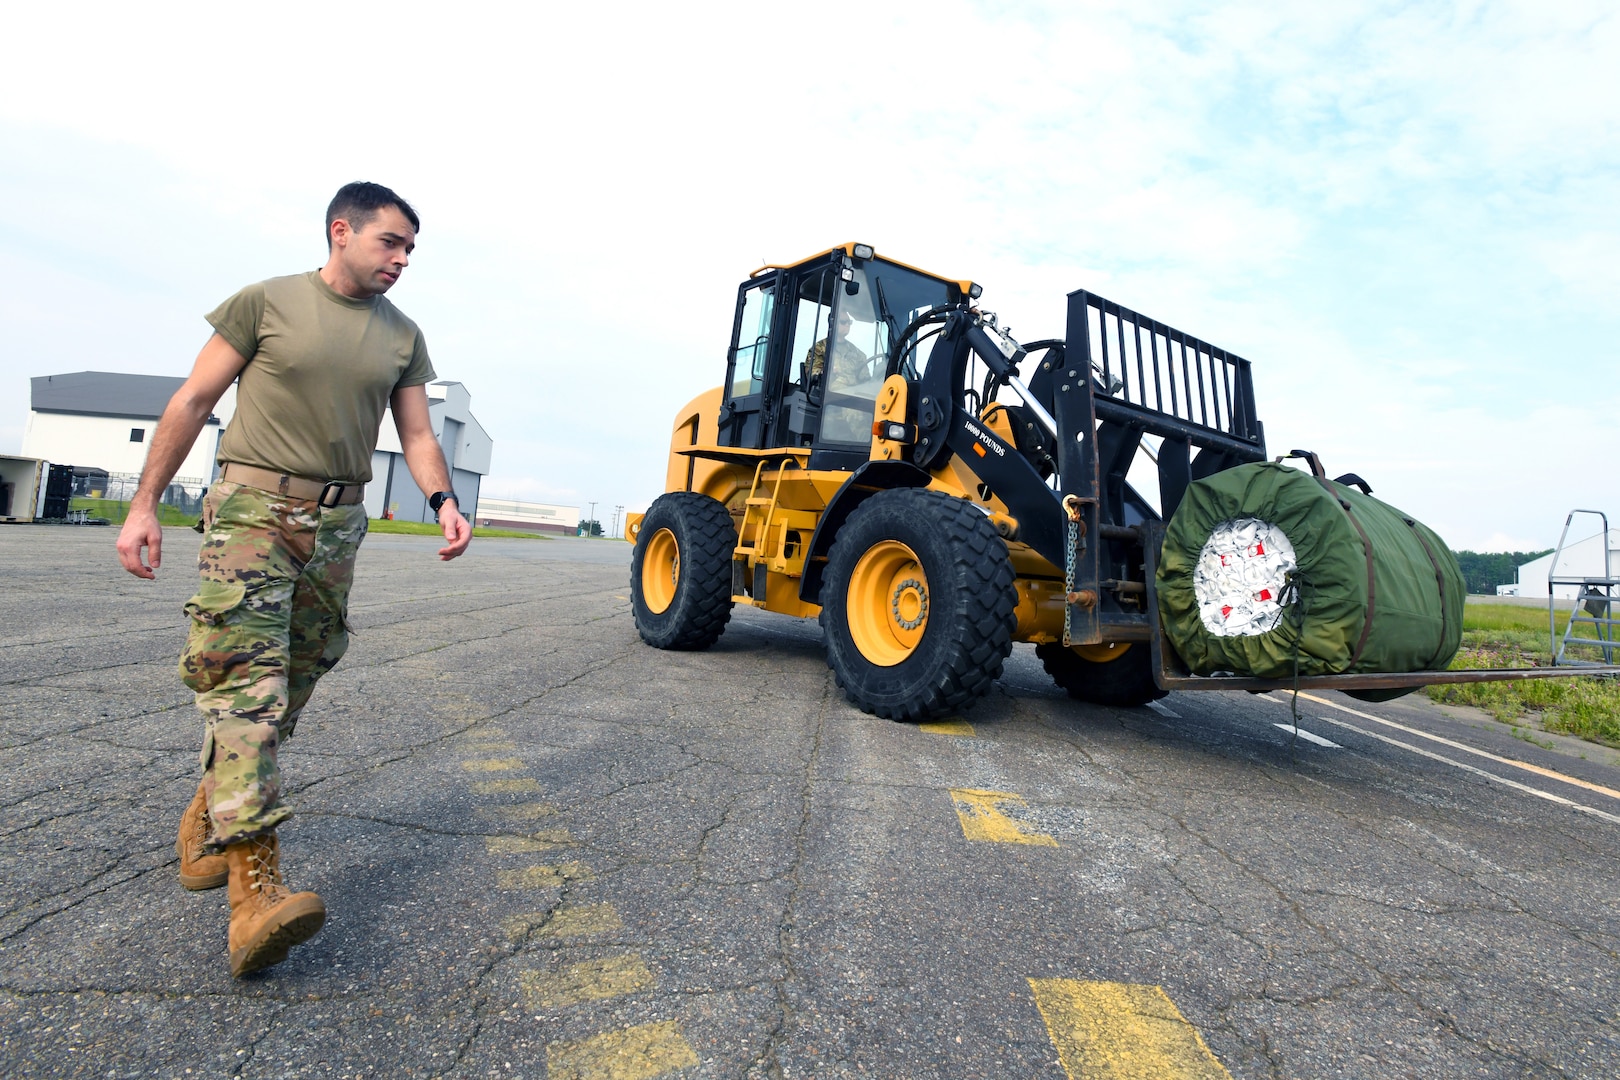 Staff Sgt. Christopher Jones, a radio frequency transmission specialist with the Florida Air National Guard’s 114th Electromagnetic Warfare Squadron, walks with a tractor carrying base shelter equipment as part of exercise ThunderMoose, June 13, 2023, at Bangor Air National Guard Base in Maine. The National Guard provides 60 percent of space electromagnetic warfare capability to the Space Force’s Space Operations Command.